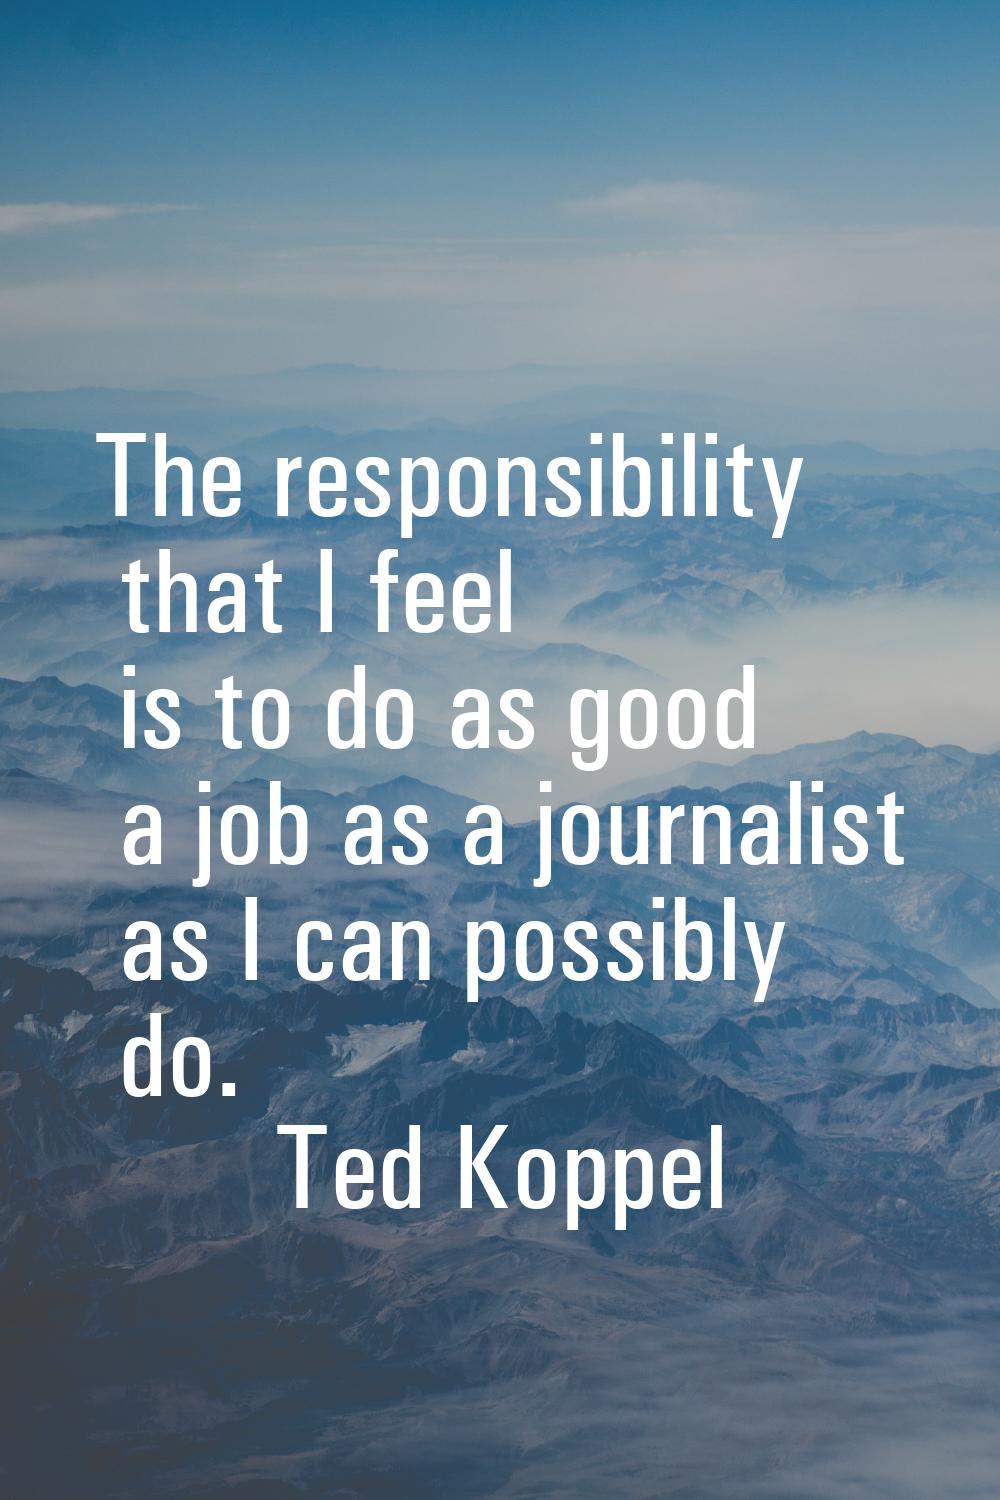 The responsibility that I feel is to do as good a job as a journalist as I can possibly do.